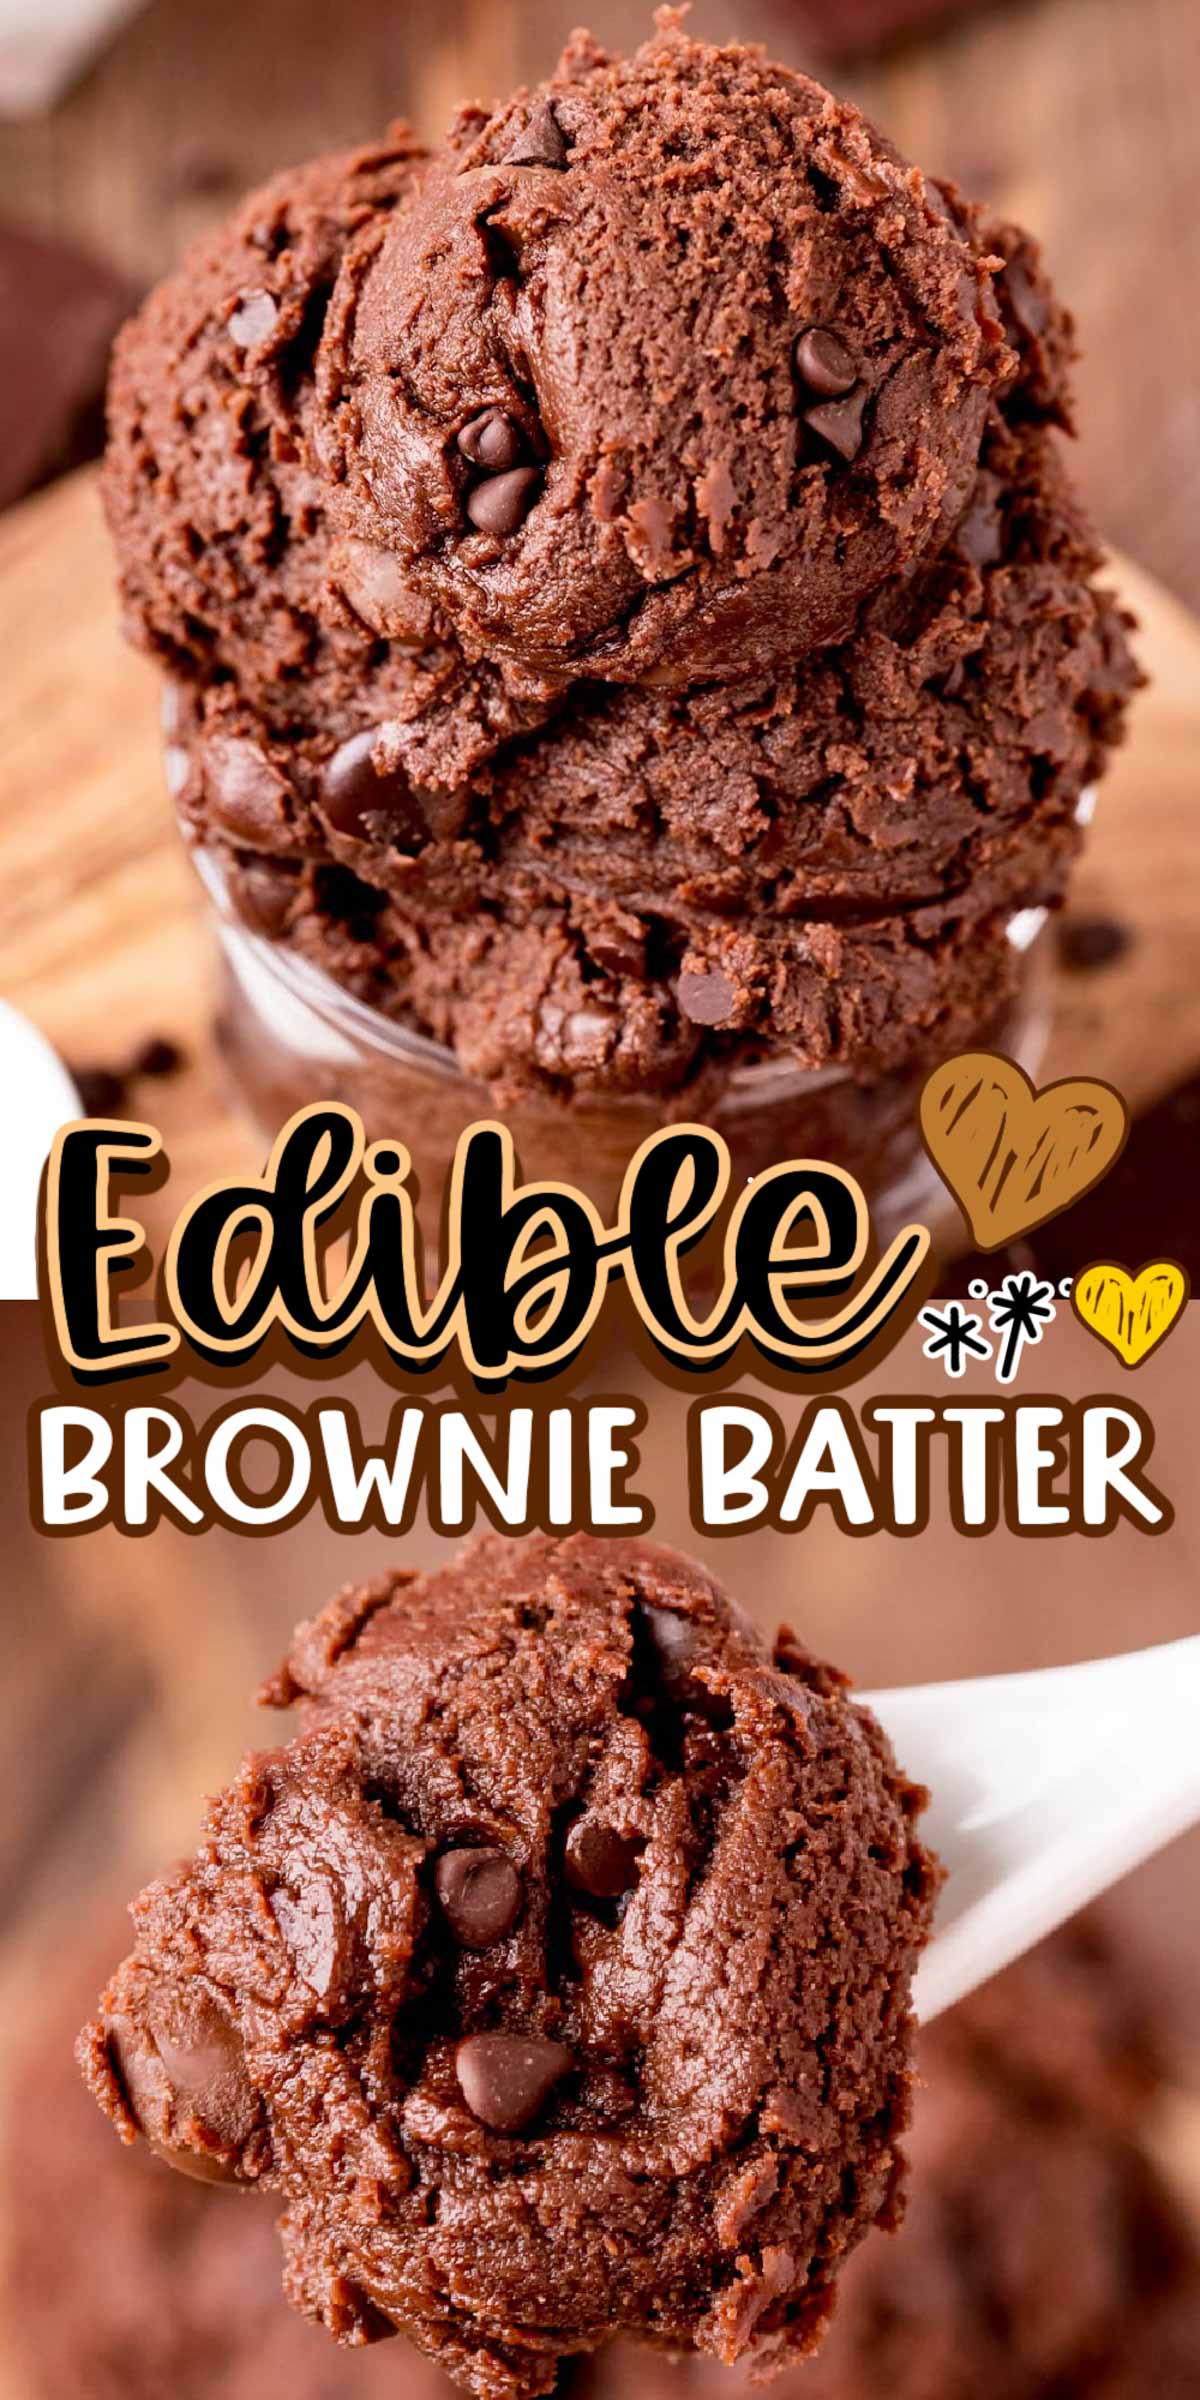 This Edible Brownie Batter is an easy no-bake 3-ingredient recipe overflowing with rich, fudgy brownie delight that tastes just like you're licking the real deal off the spatula! via @sugarandsoulco